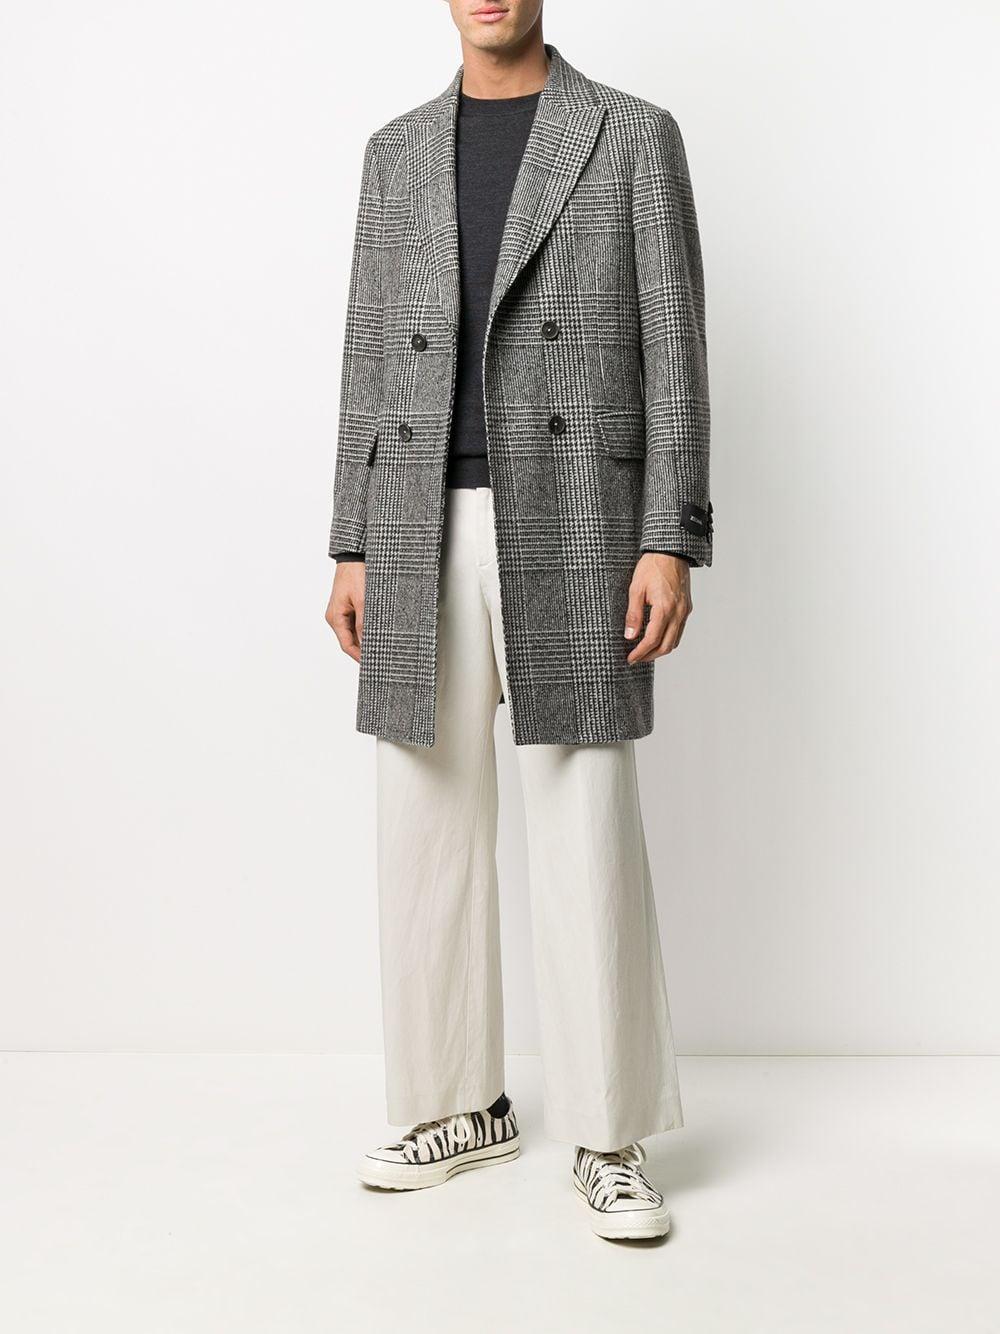 Z Zegna Wool Double-breasted Houndstooth Coat in Grey (Gray) for Men - Lyst